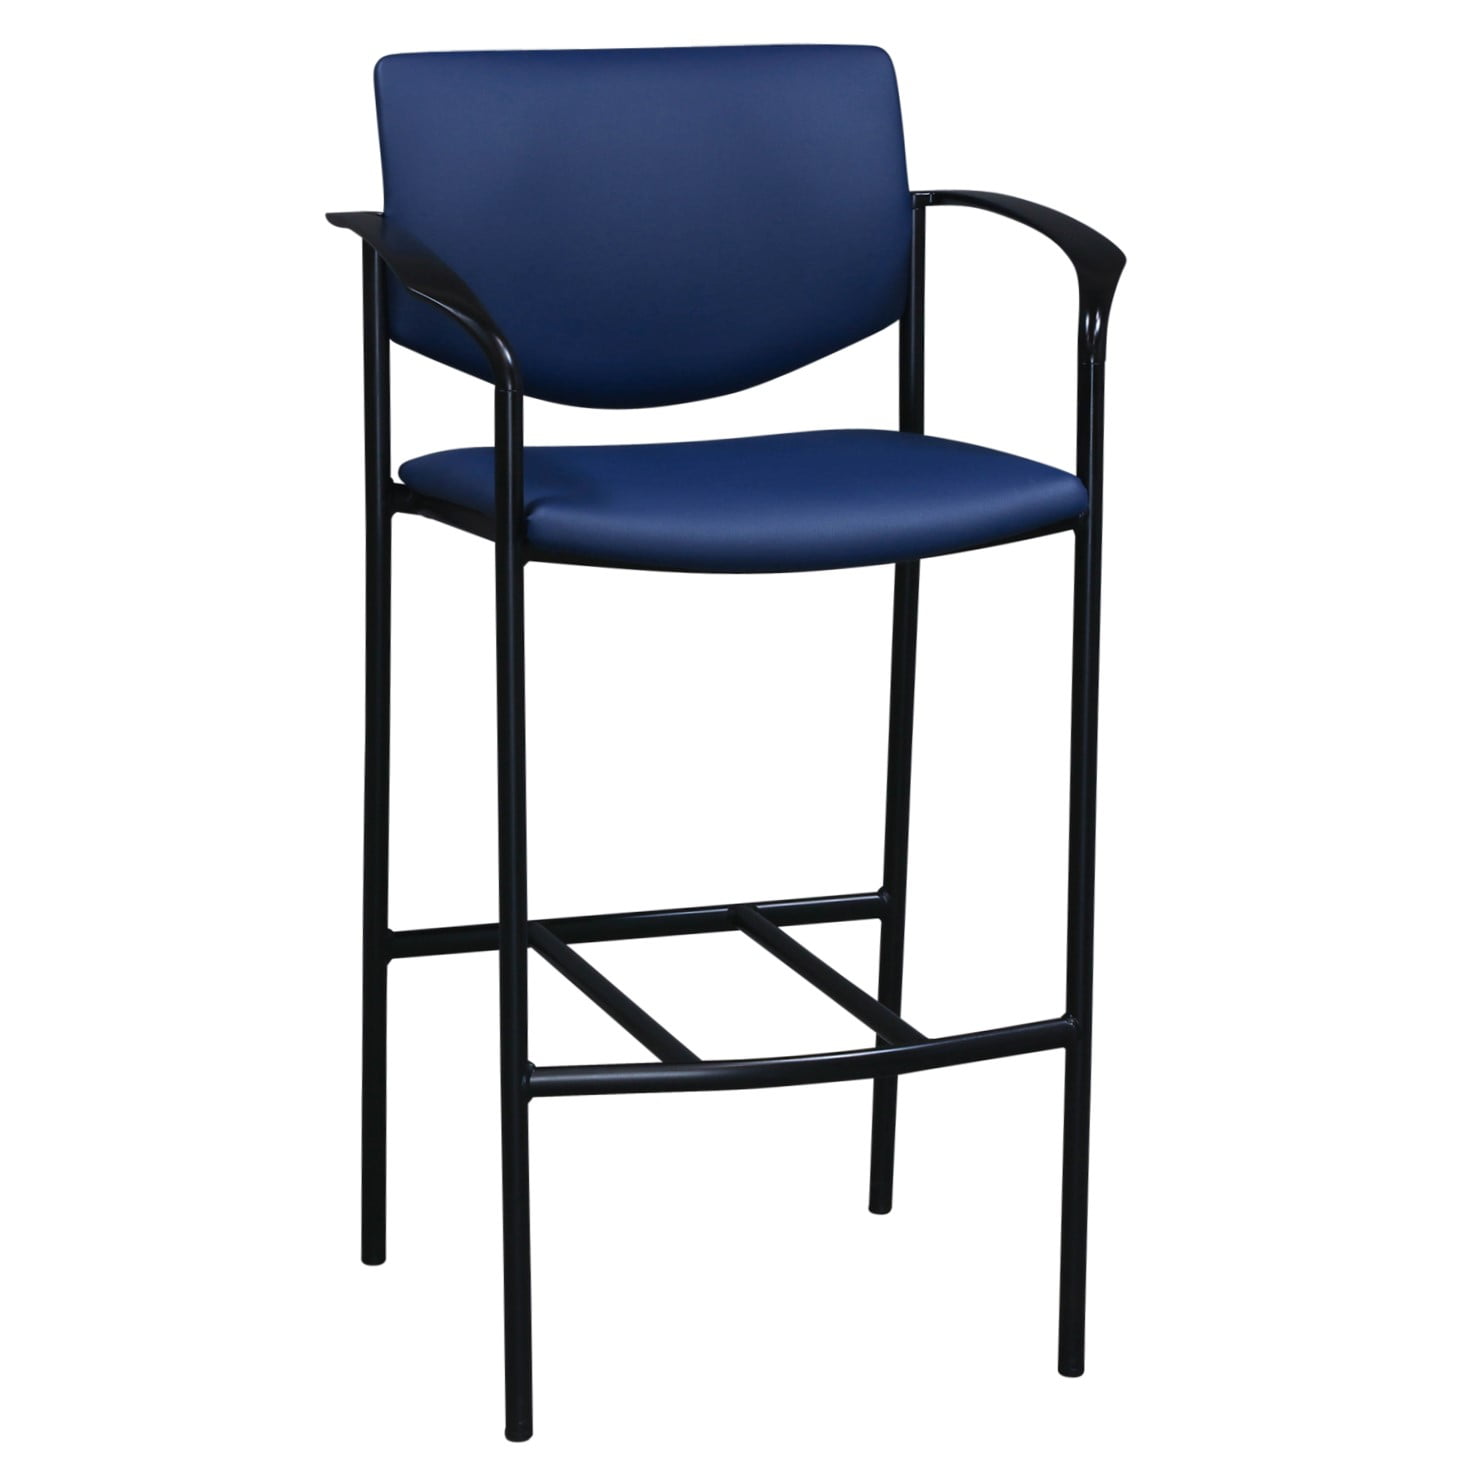 Steelcase Player Used PU Leather Cafe Stool, Ocean Blue